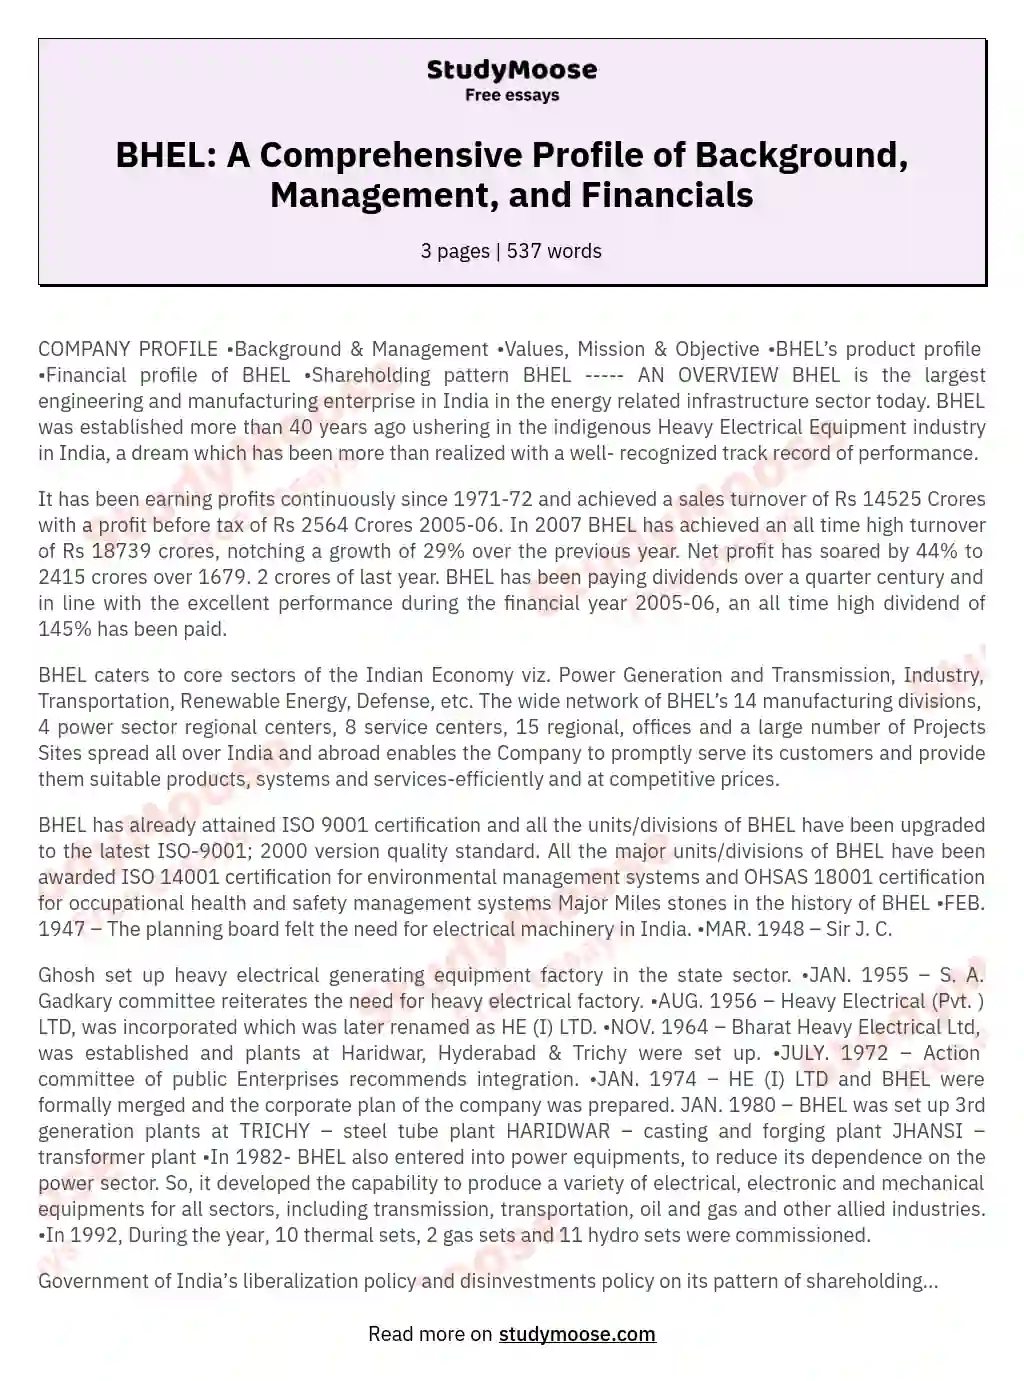 BHEL: A Comprehensive Profile of Background, Management, and Financials essay